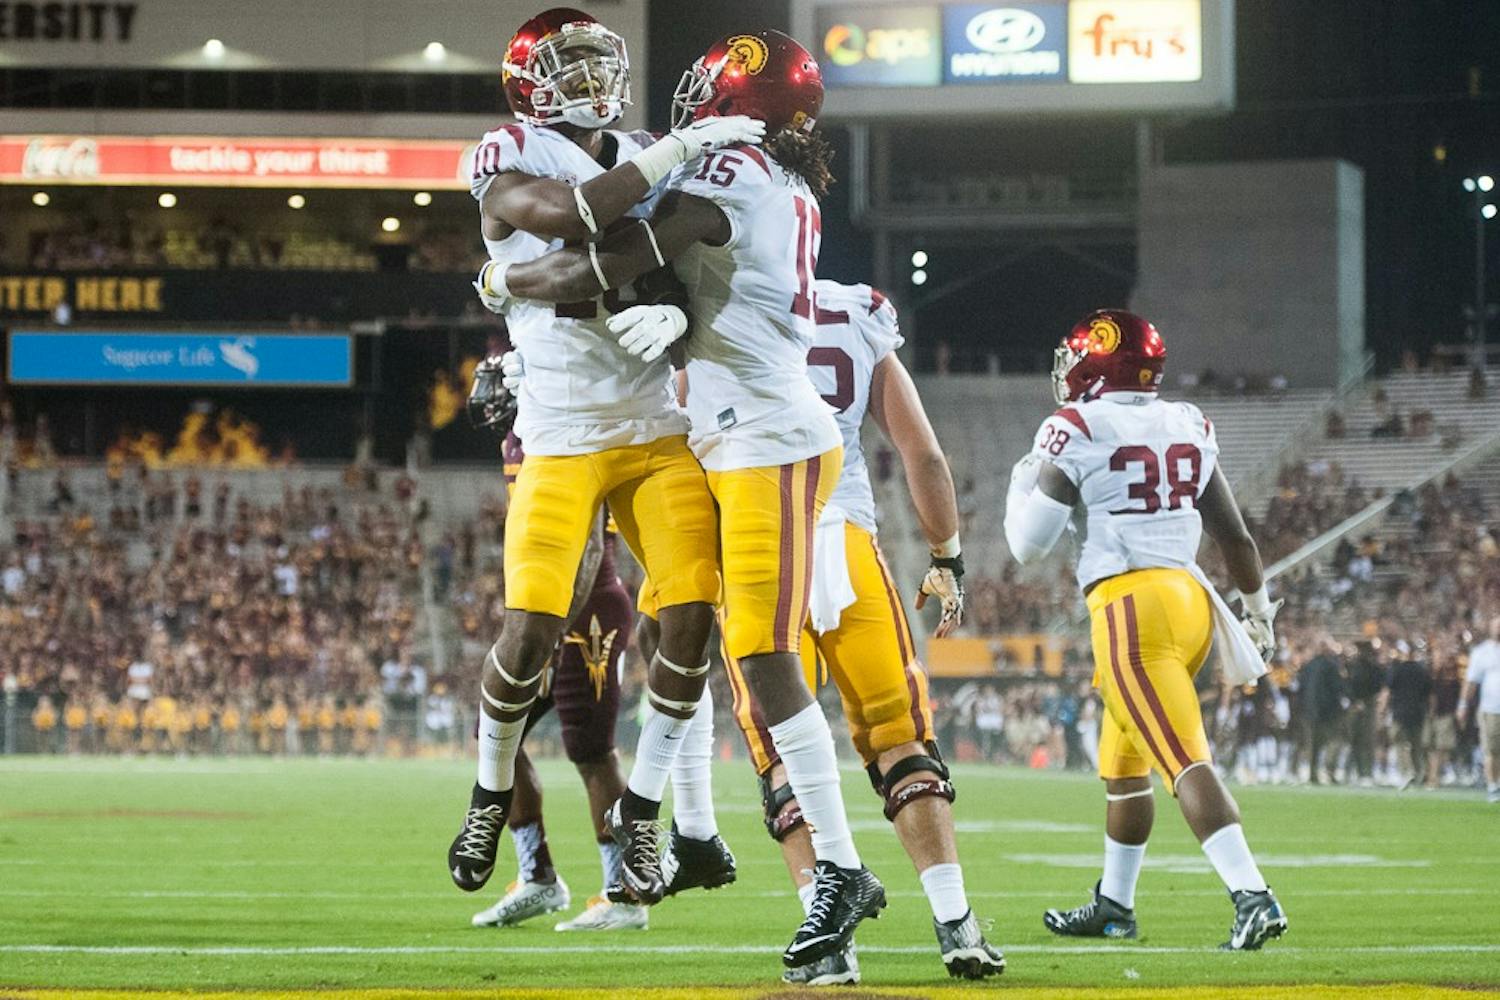 USC redshirt freshman wide receiver Jalen Greene (10) and redshirt junior wide receiver Isaac Whitney celebrate after a USC touchdown against ASU on Saturday, Sept. 26, 2015, at Sun Devil Stadium in Tempe. The Trojans defeated the Sun Devils 42-14.